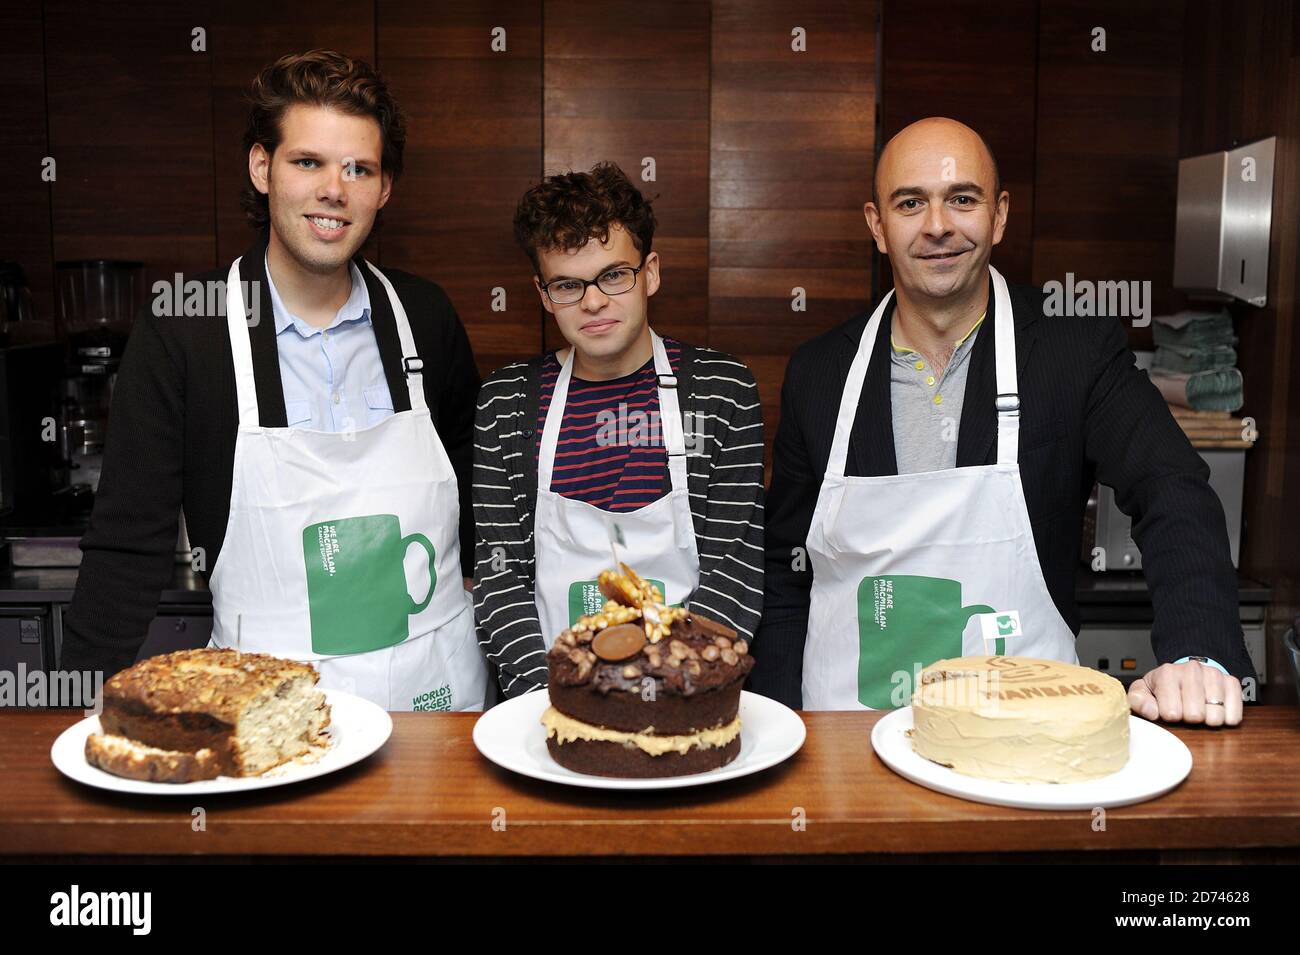 Absolute Radio 'Man bake' competition finalists (l-r) Letting agent Ryan Leahy, Student Luke Boatright and magistrate Philip Newton) pictured with their cake entries at the Absolute Radio studios in central London.  Stock Photo